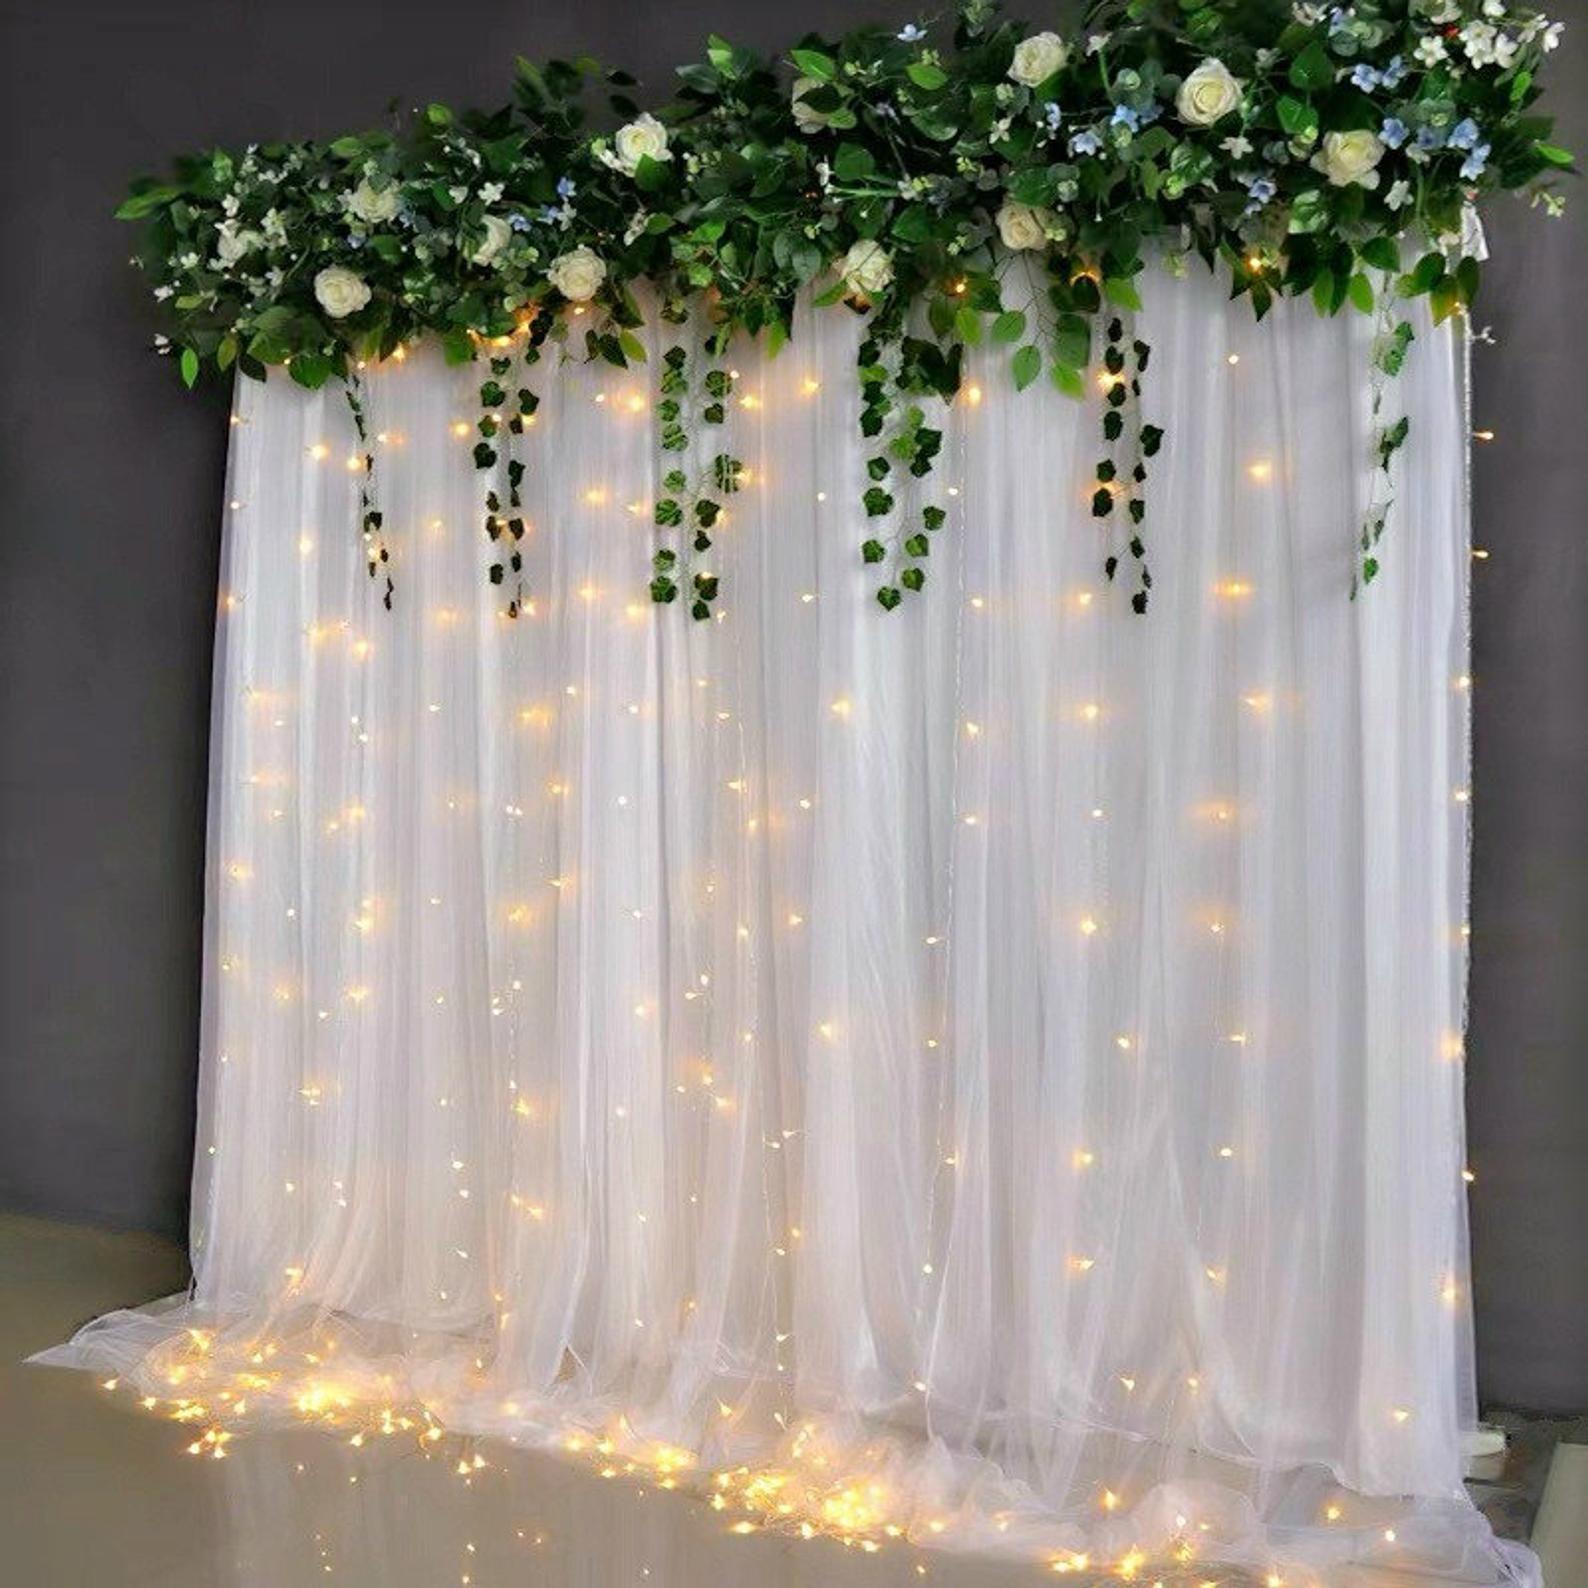 Curtain Lights, String Curtains, led Curtain Light - If you say i do